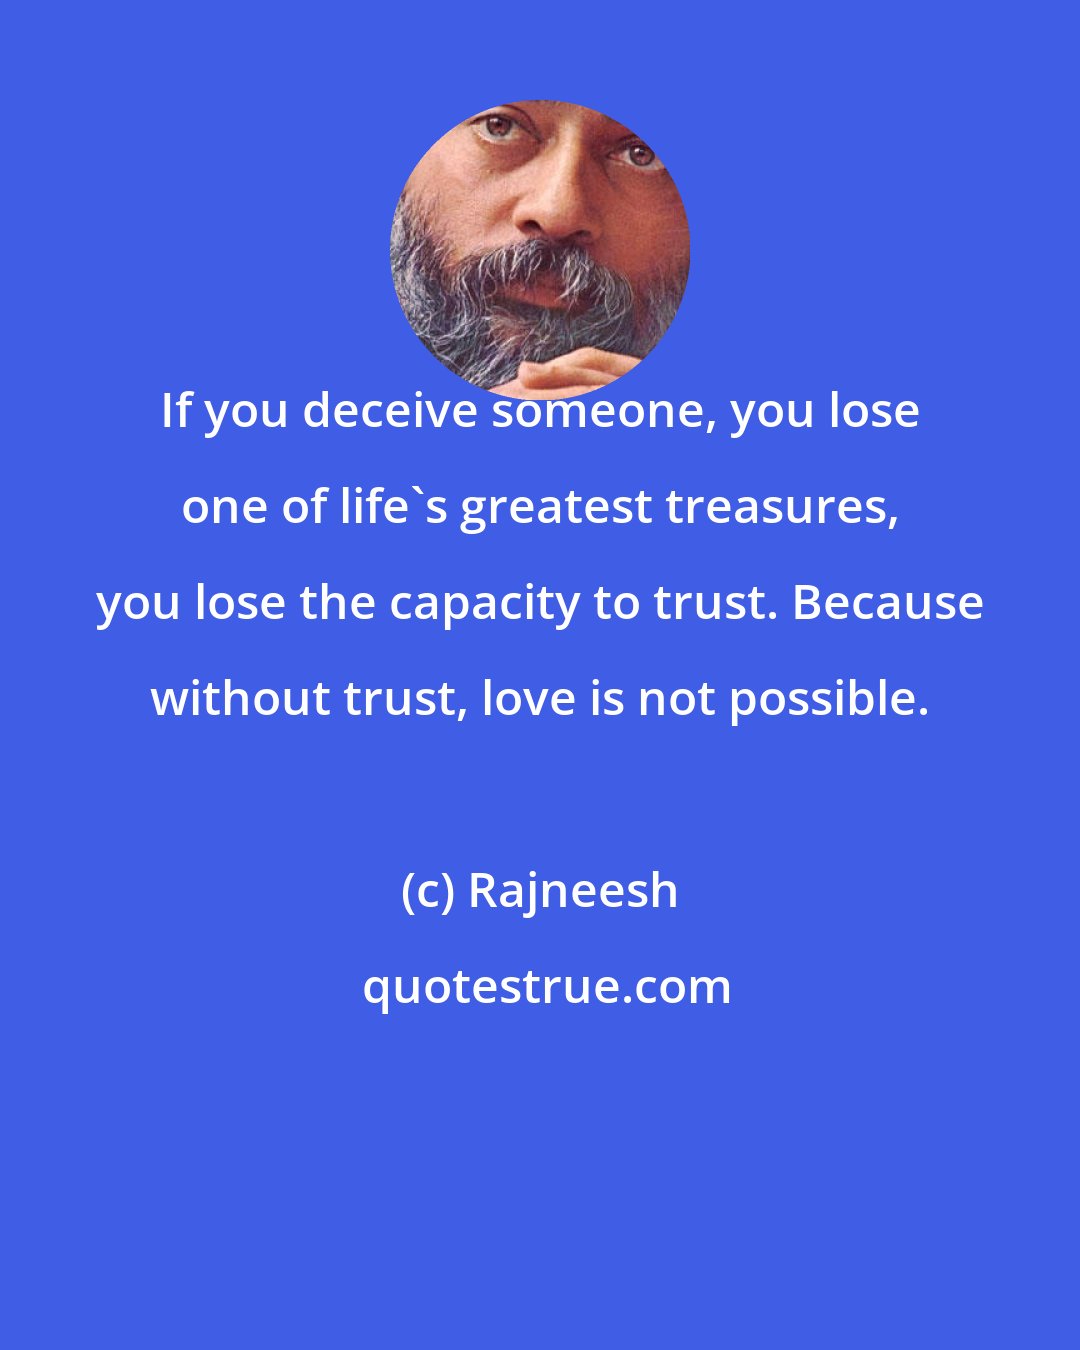 Rajneesh: If you deceive someone, you lose one of life's greatest treasures, you lose the capacity to trust. Because without trust, love is not possible.